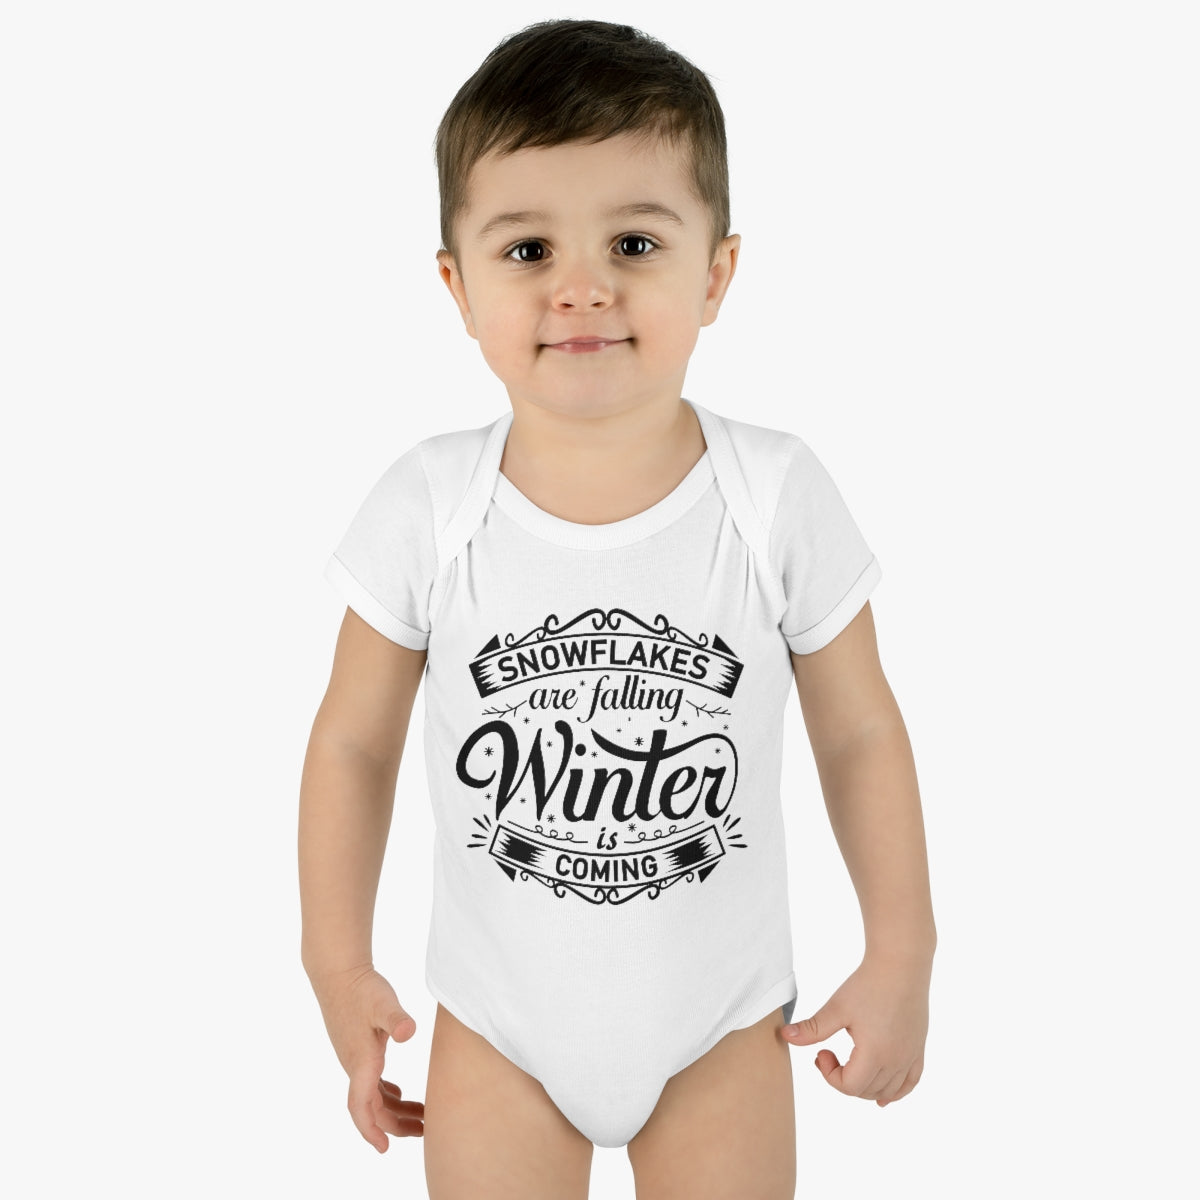 Snow flakes are falling Baby Bodysuit, Merry Christmas, Christmas Baby Bodysuit, Infant Bodysuit, Merry Christmas Baby Bodysuit